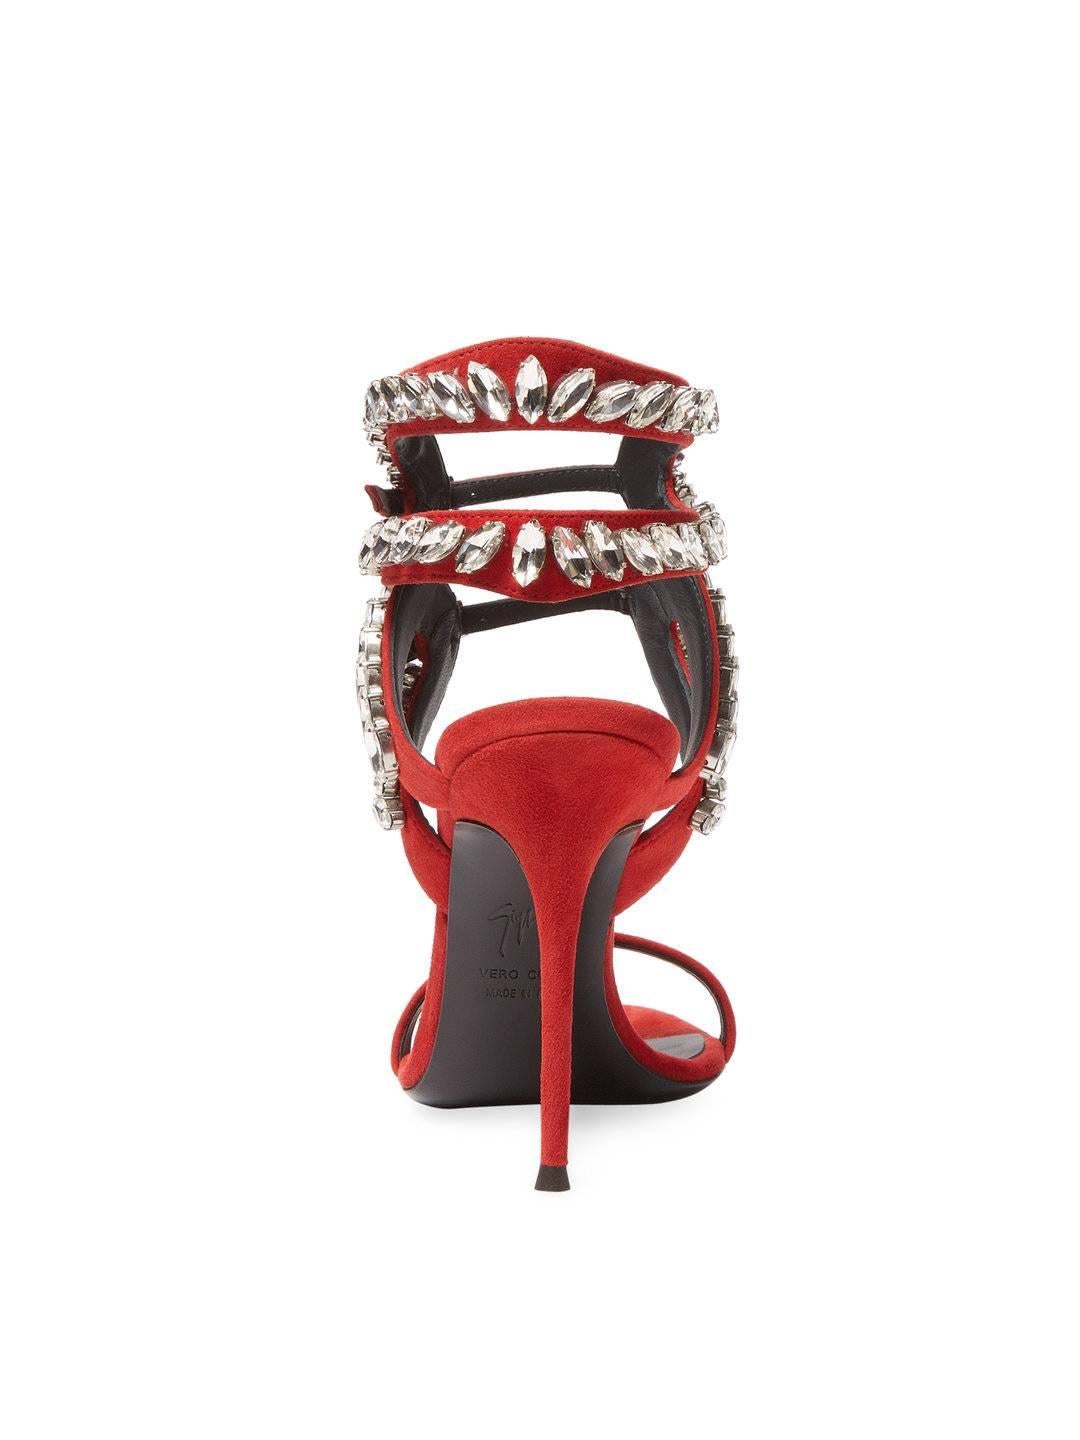 Women's Giuseppe Zanotti New Sold Out Red Suede Crystal Evening Sandals Heels in Box